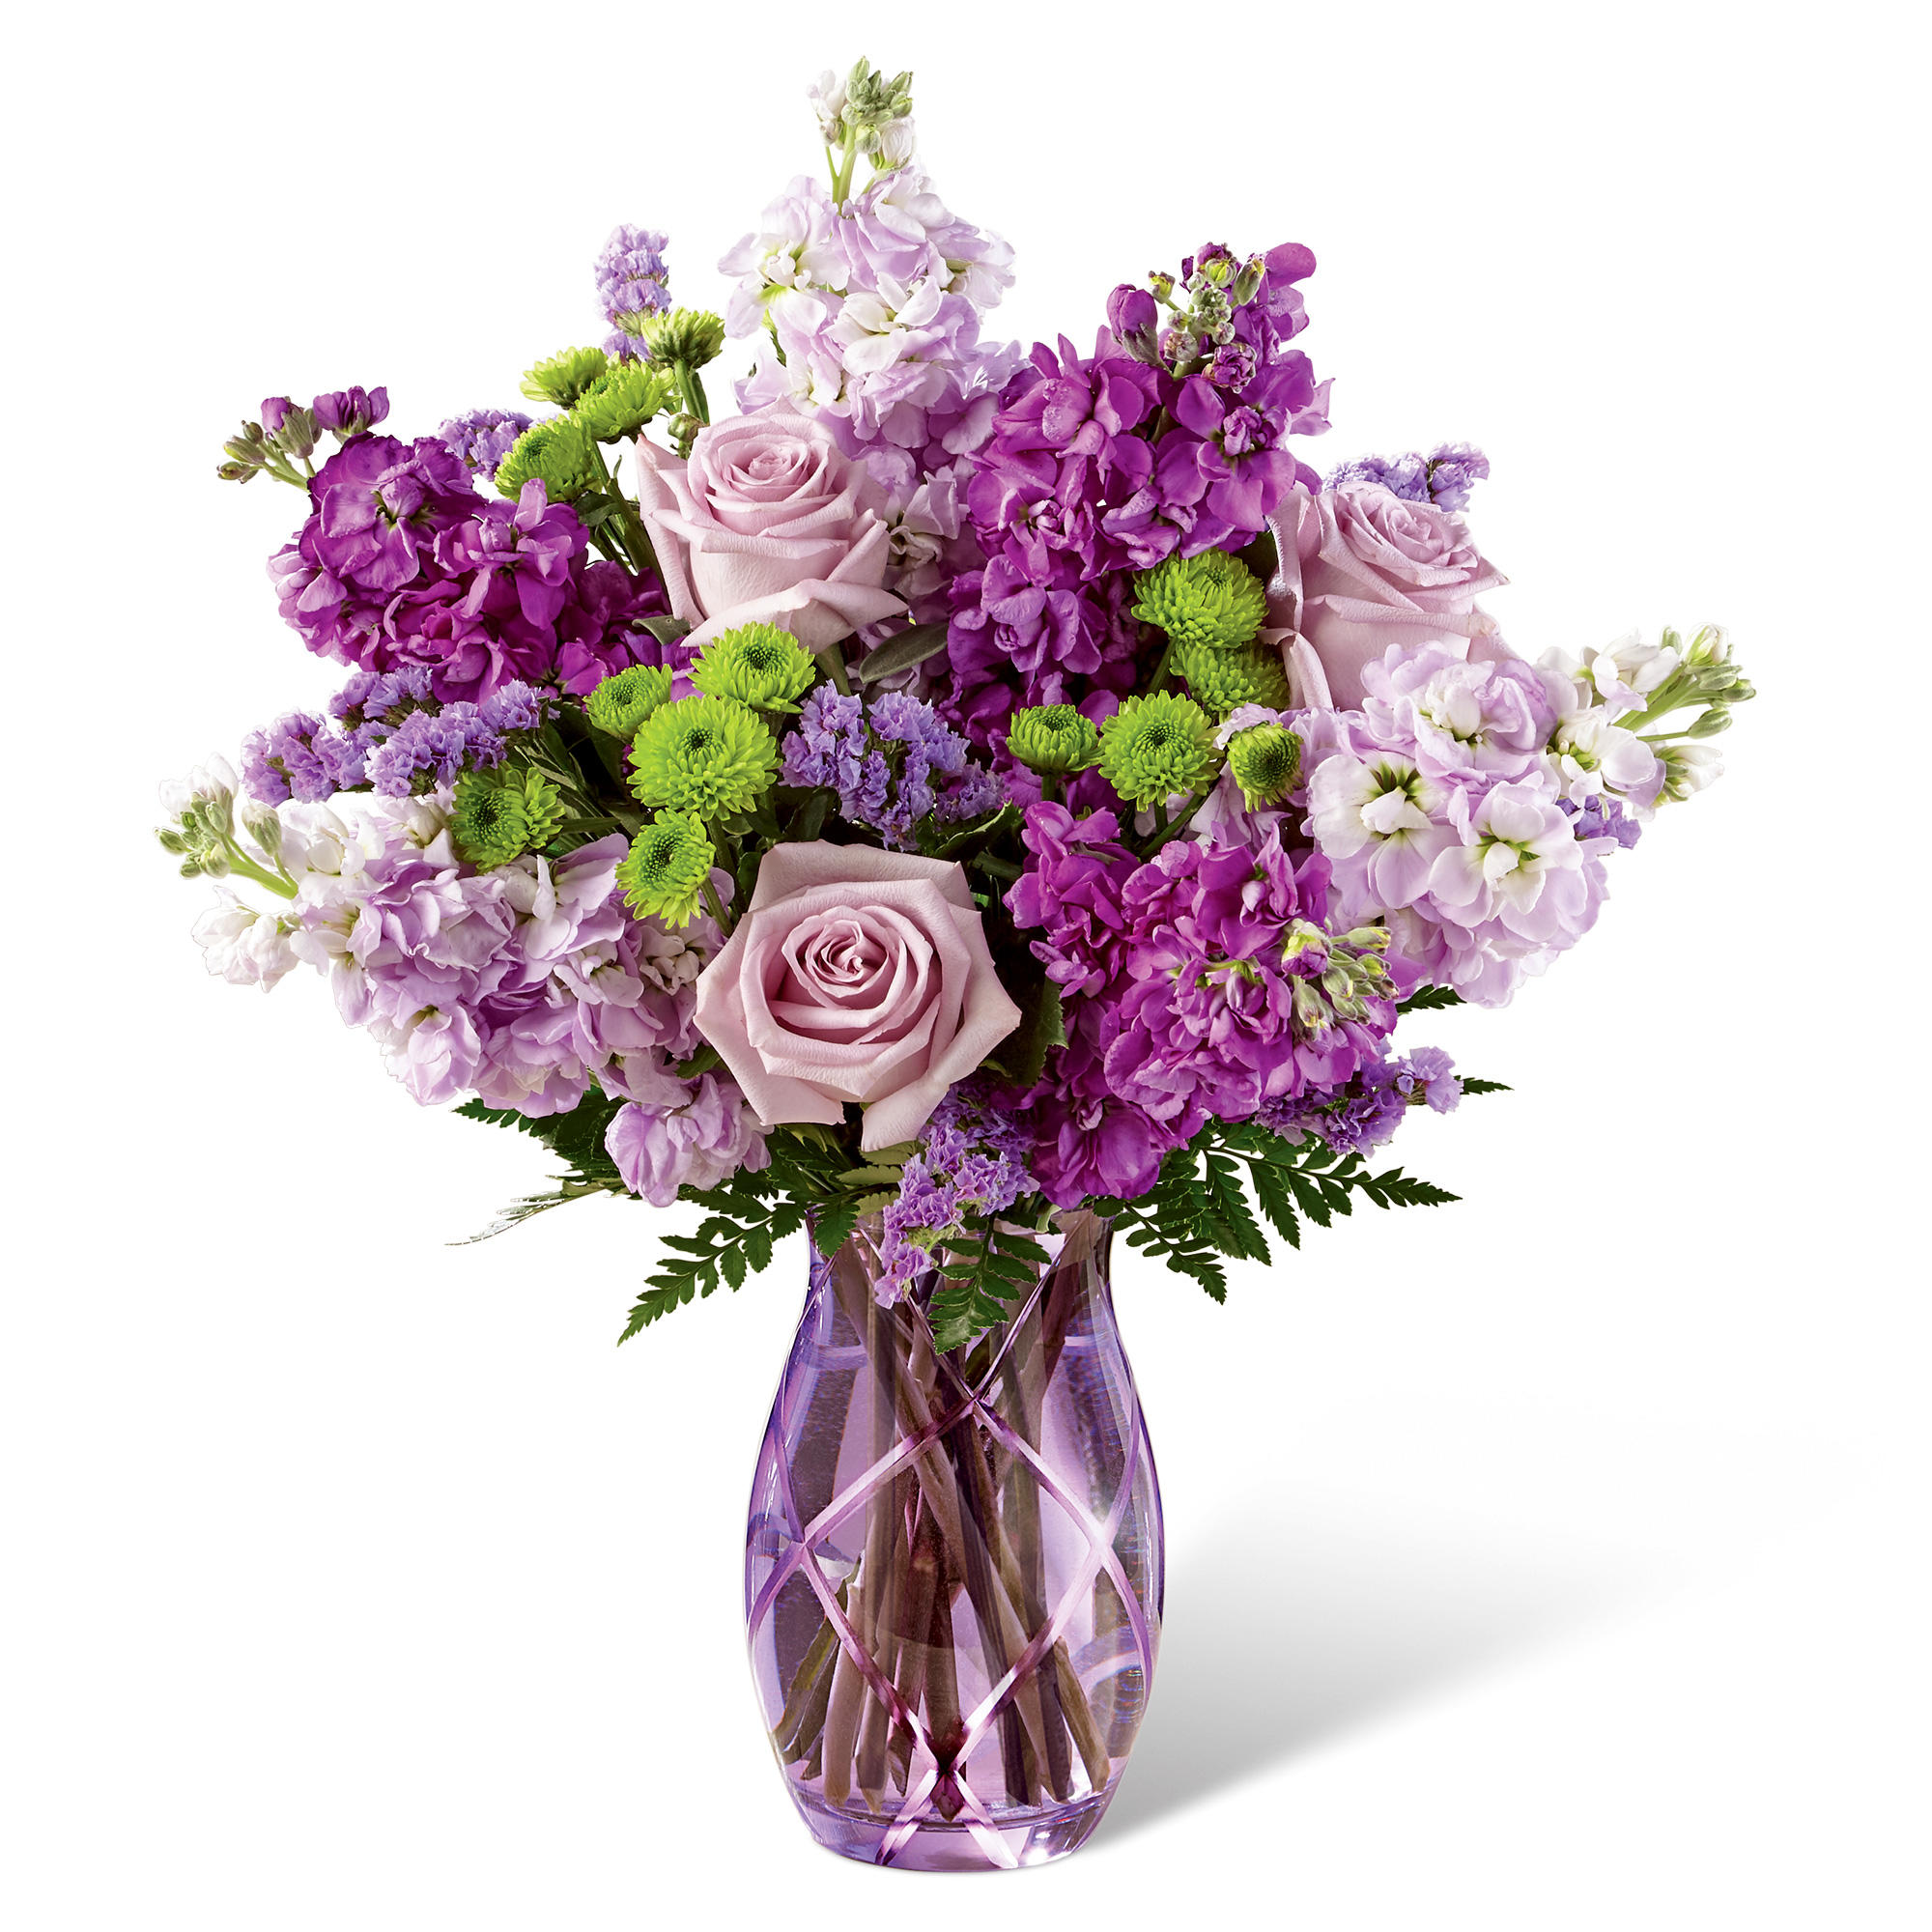 Hirt's Flowers, your modern florist with traditional values.